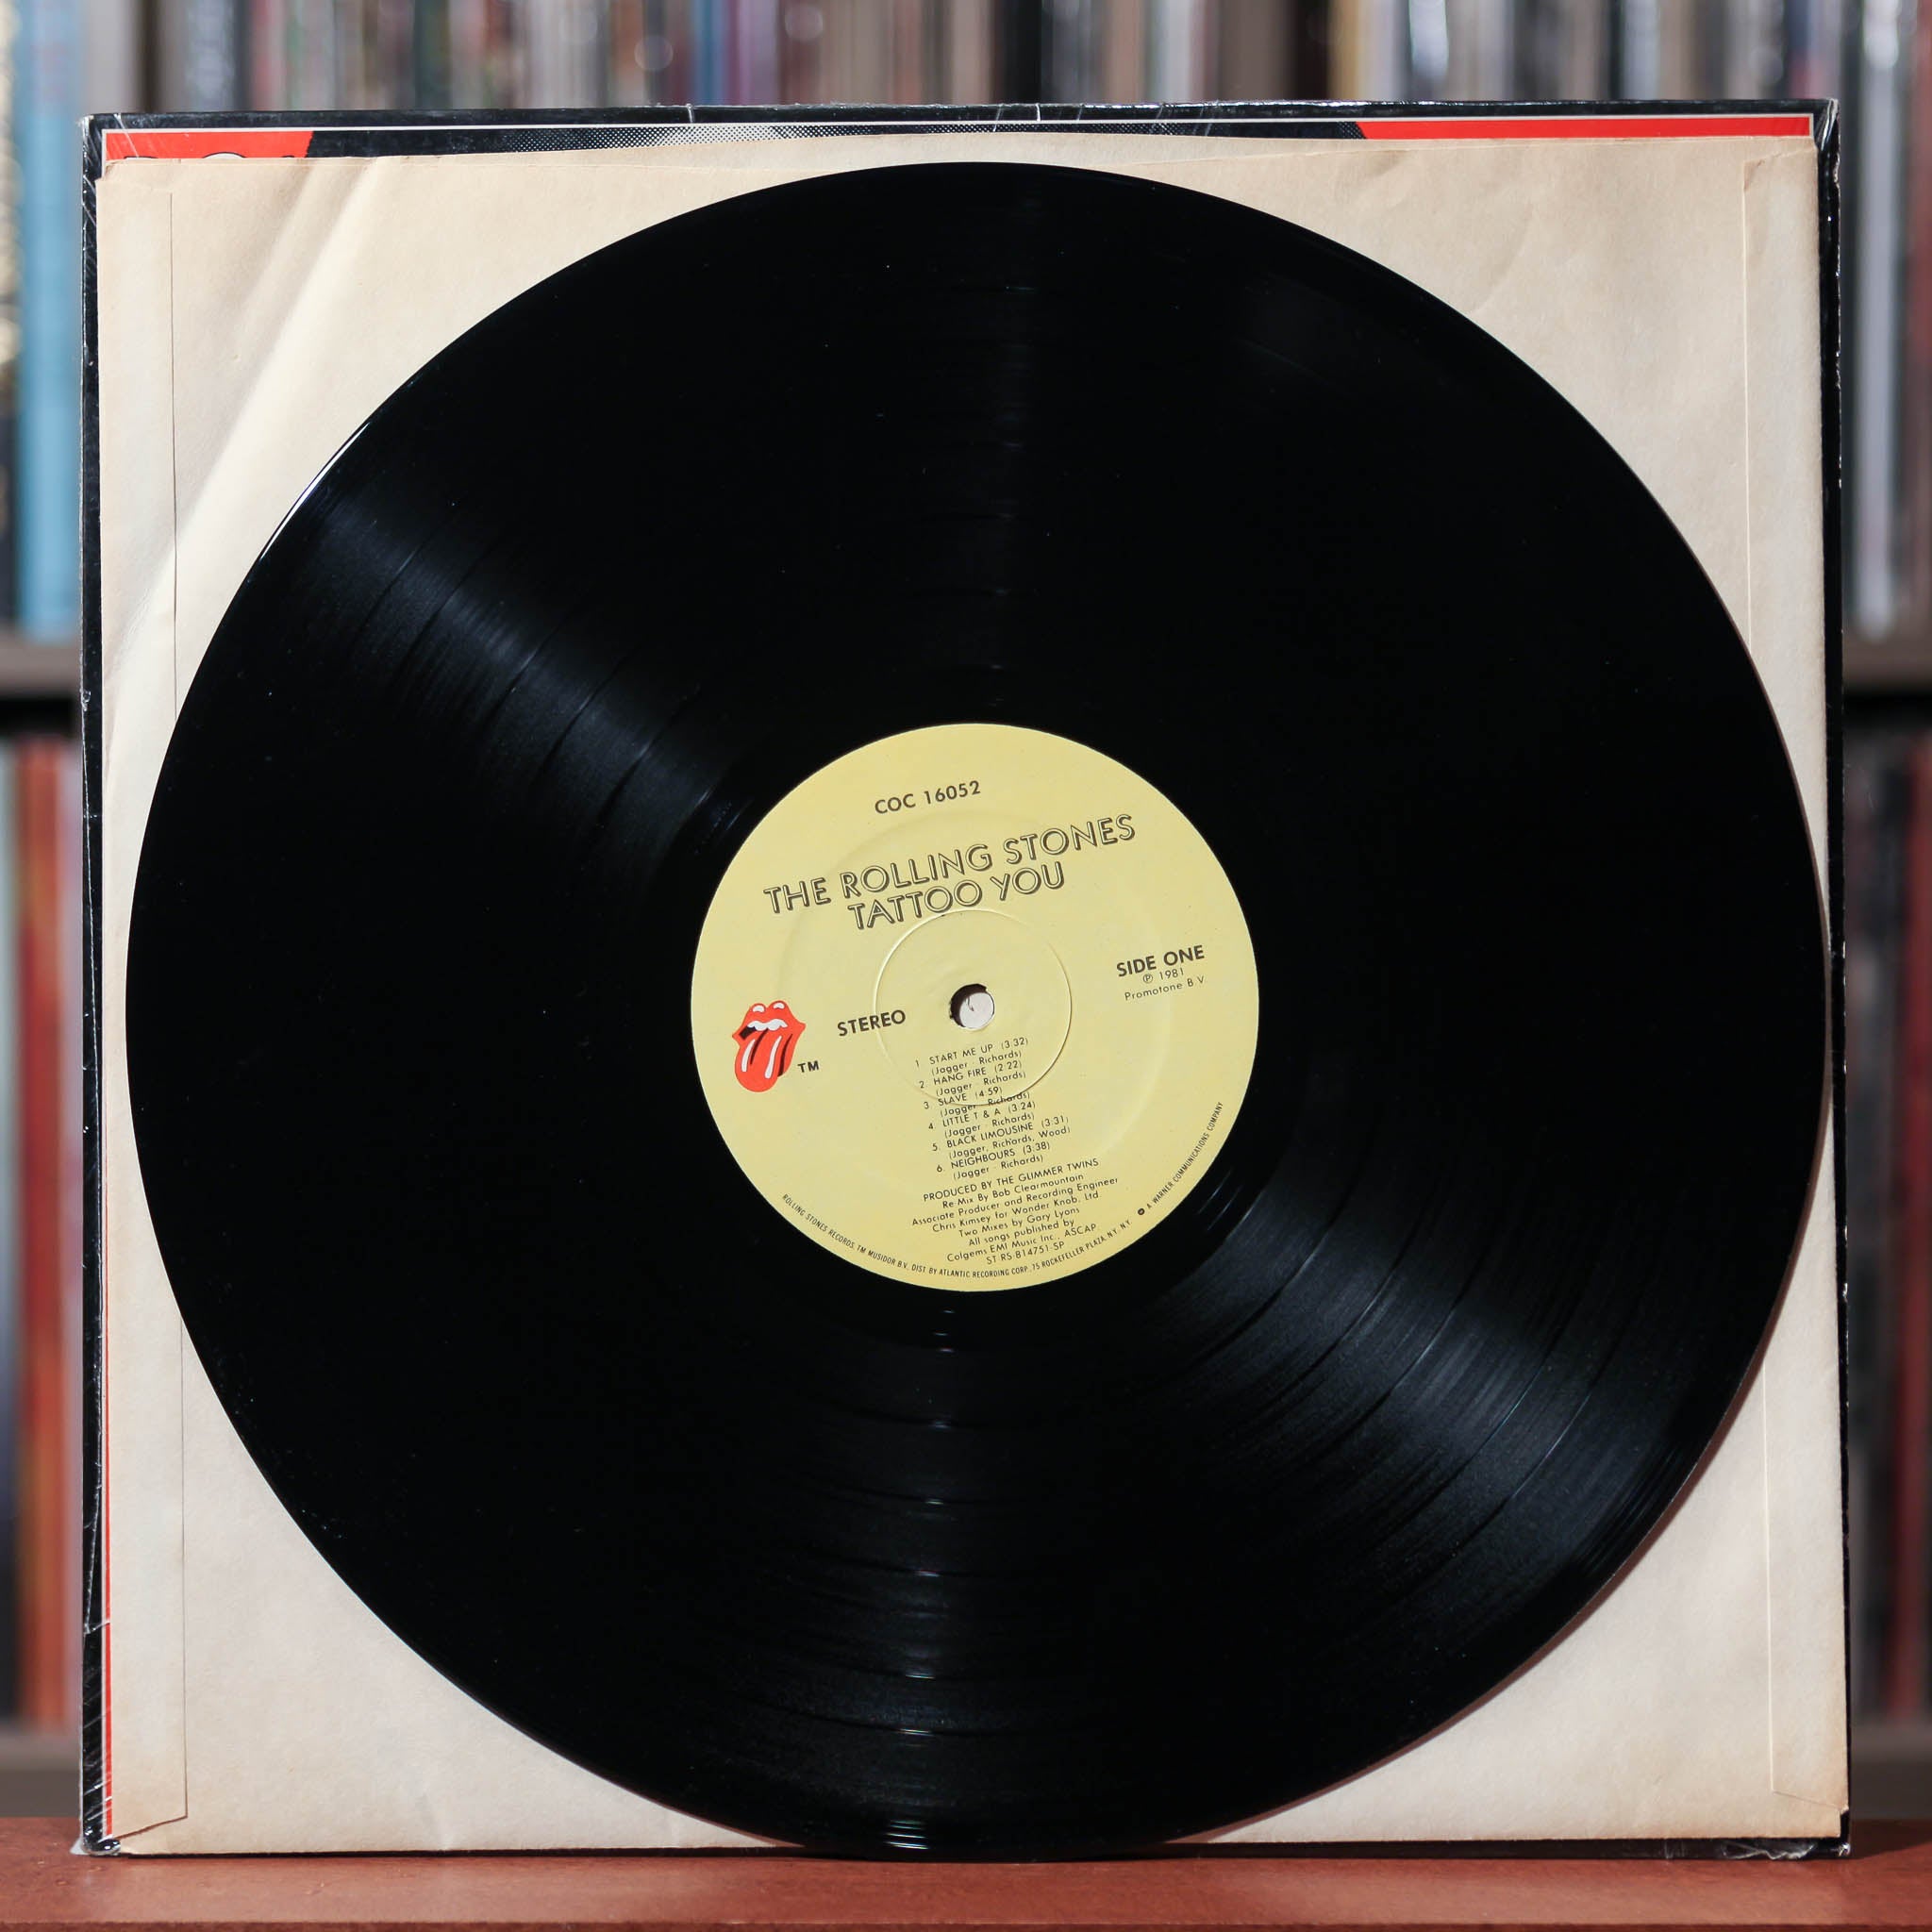 Rolling Stones; Tattoo You; First press; Yellow label; OG copy | eBay